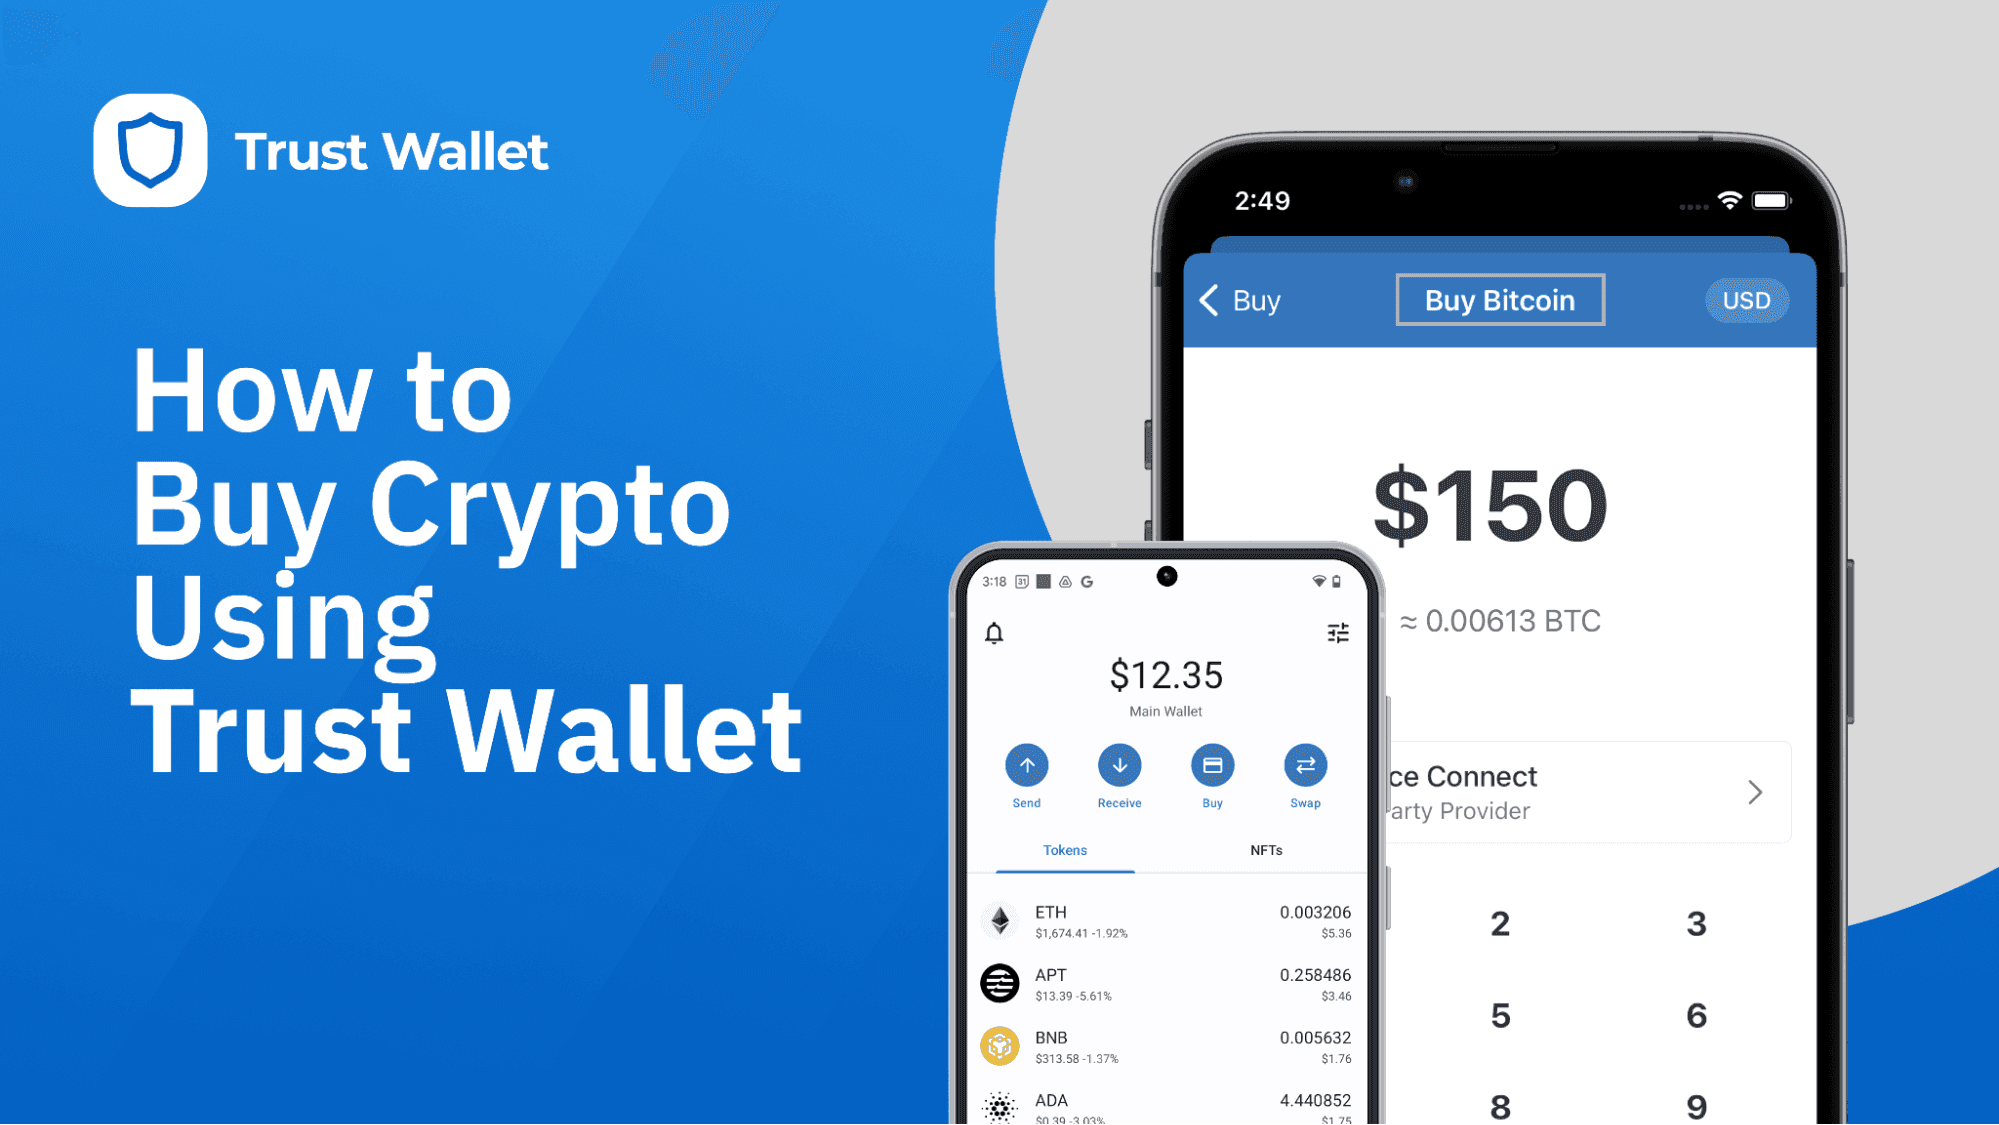 How to Transfer Crypto from Coinbase to Trust Wallet